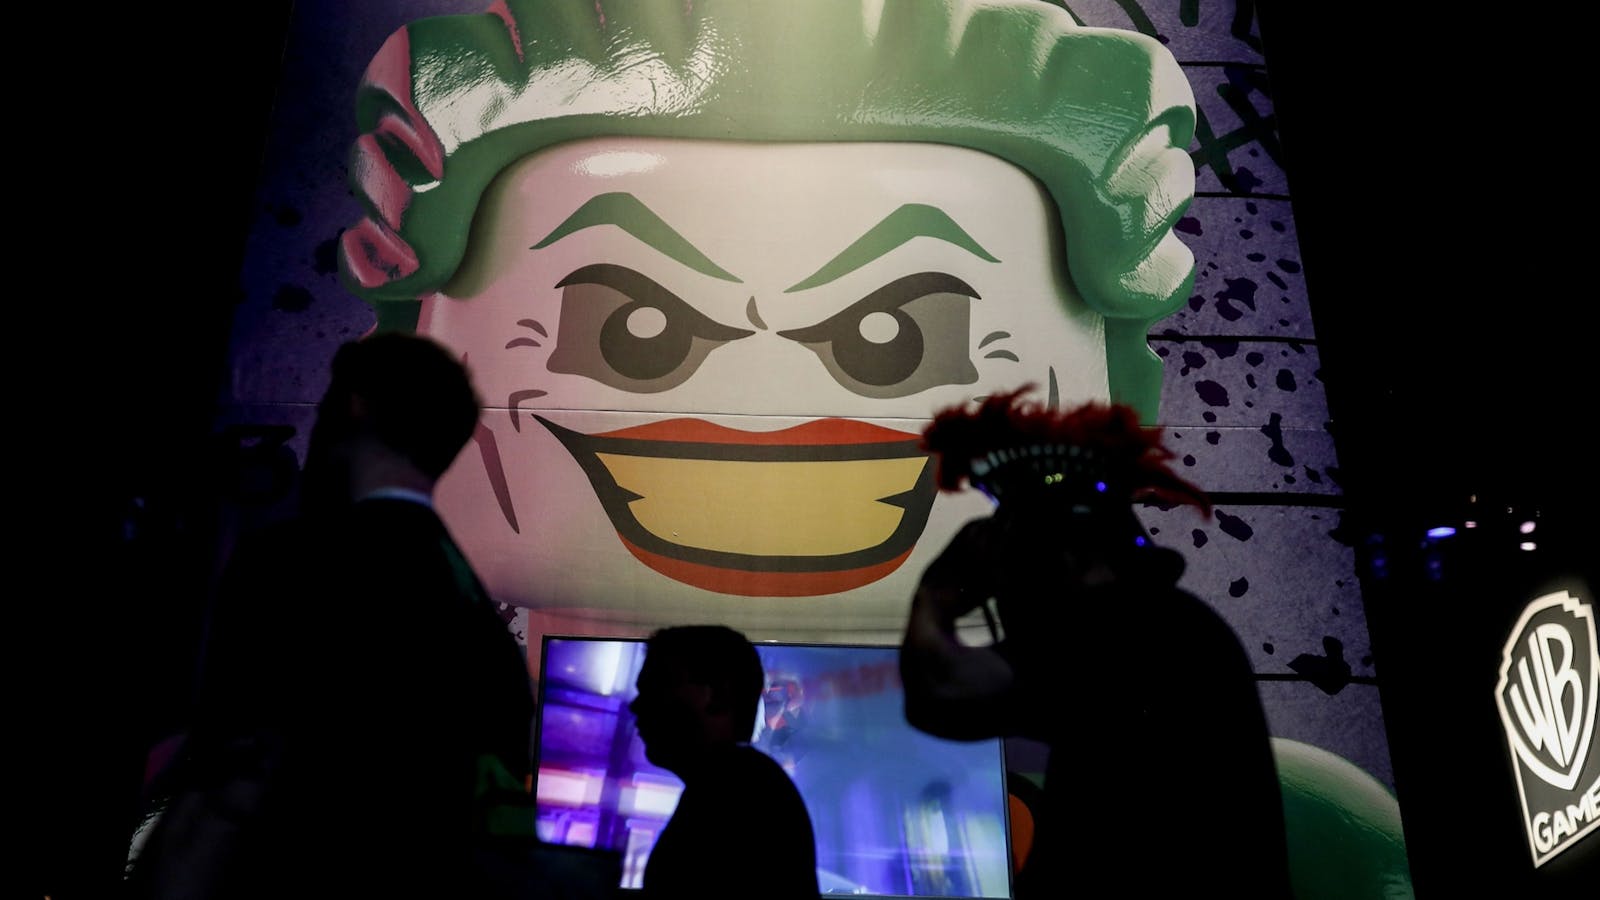 Attendees at the 2018 E3 conference in Los Angeles walk past a booth for Warner Bros. Interactive Entertainment. Photo by Bloomberg